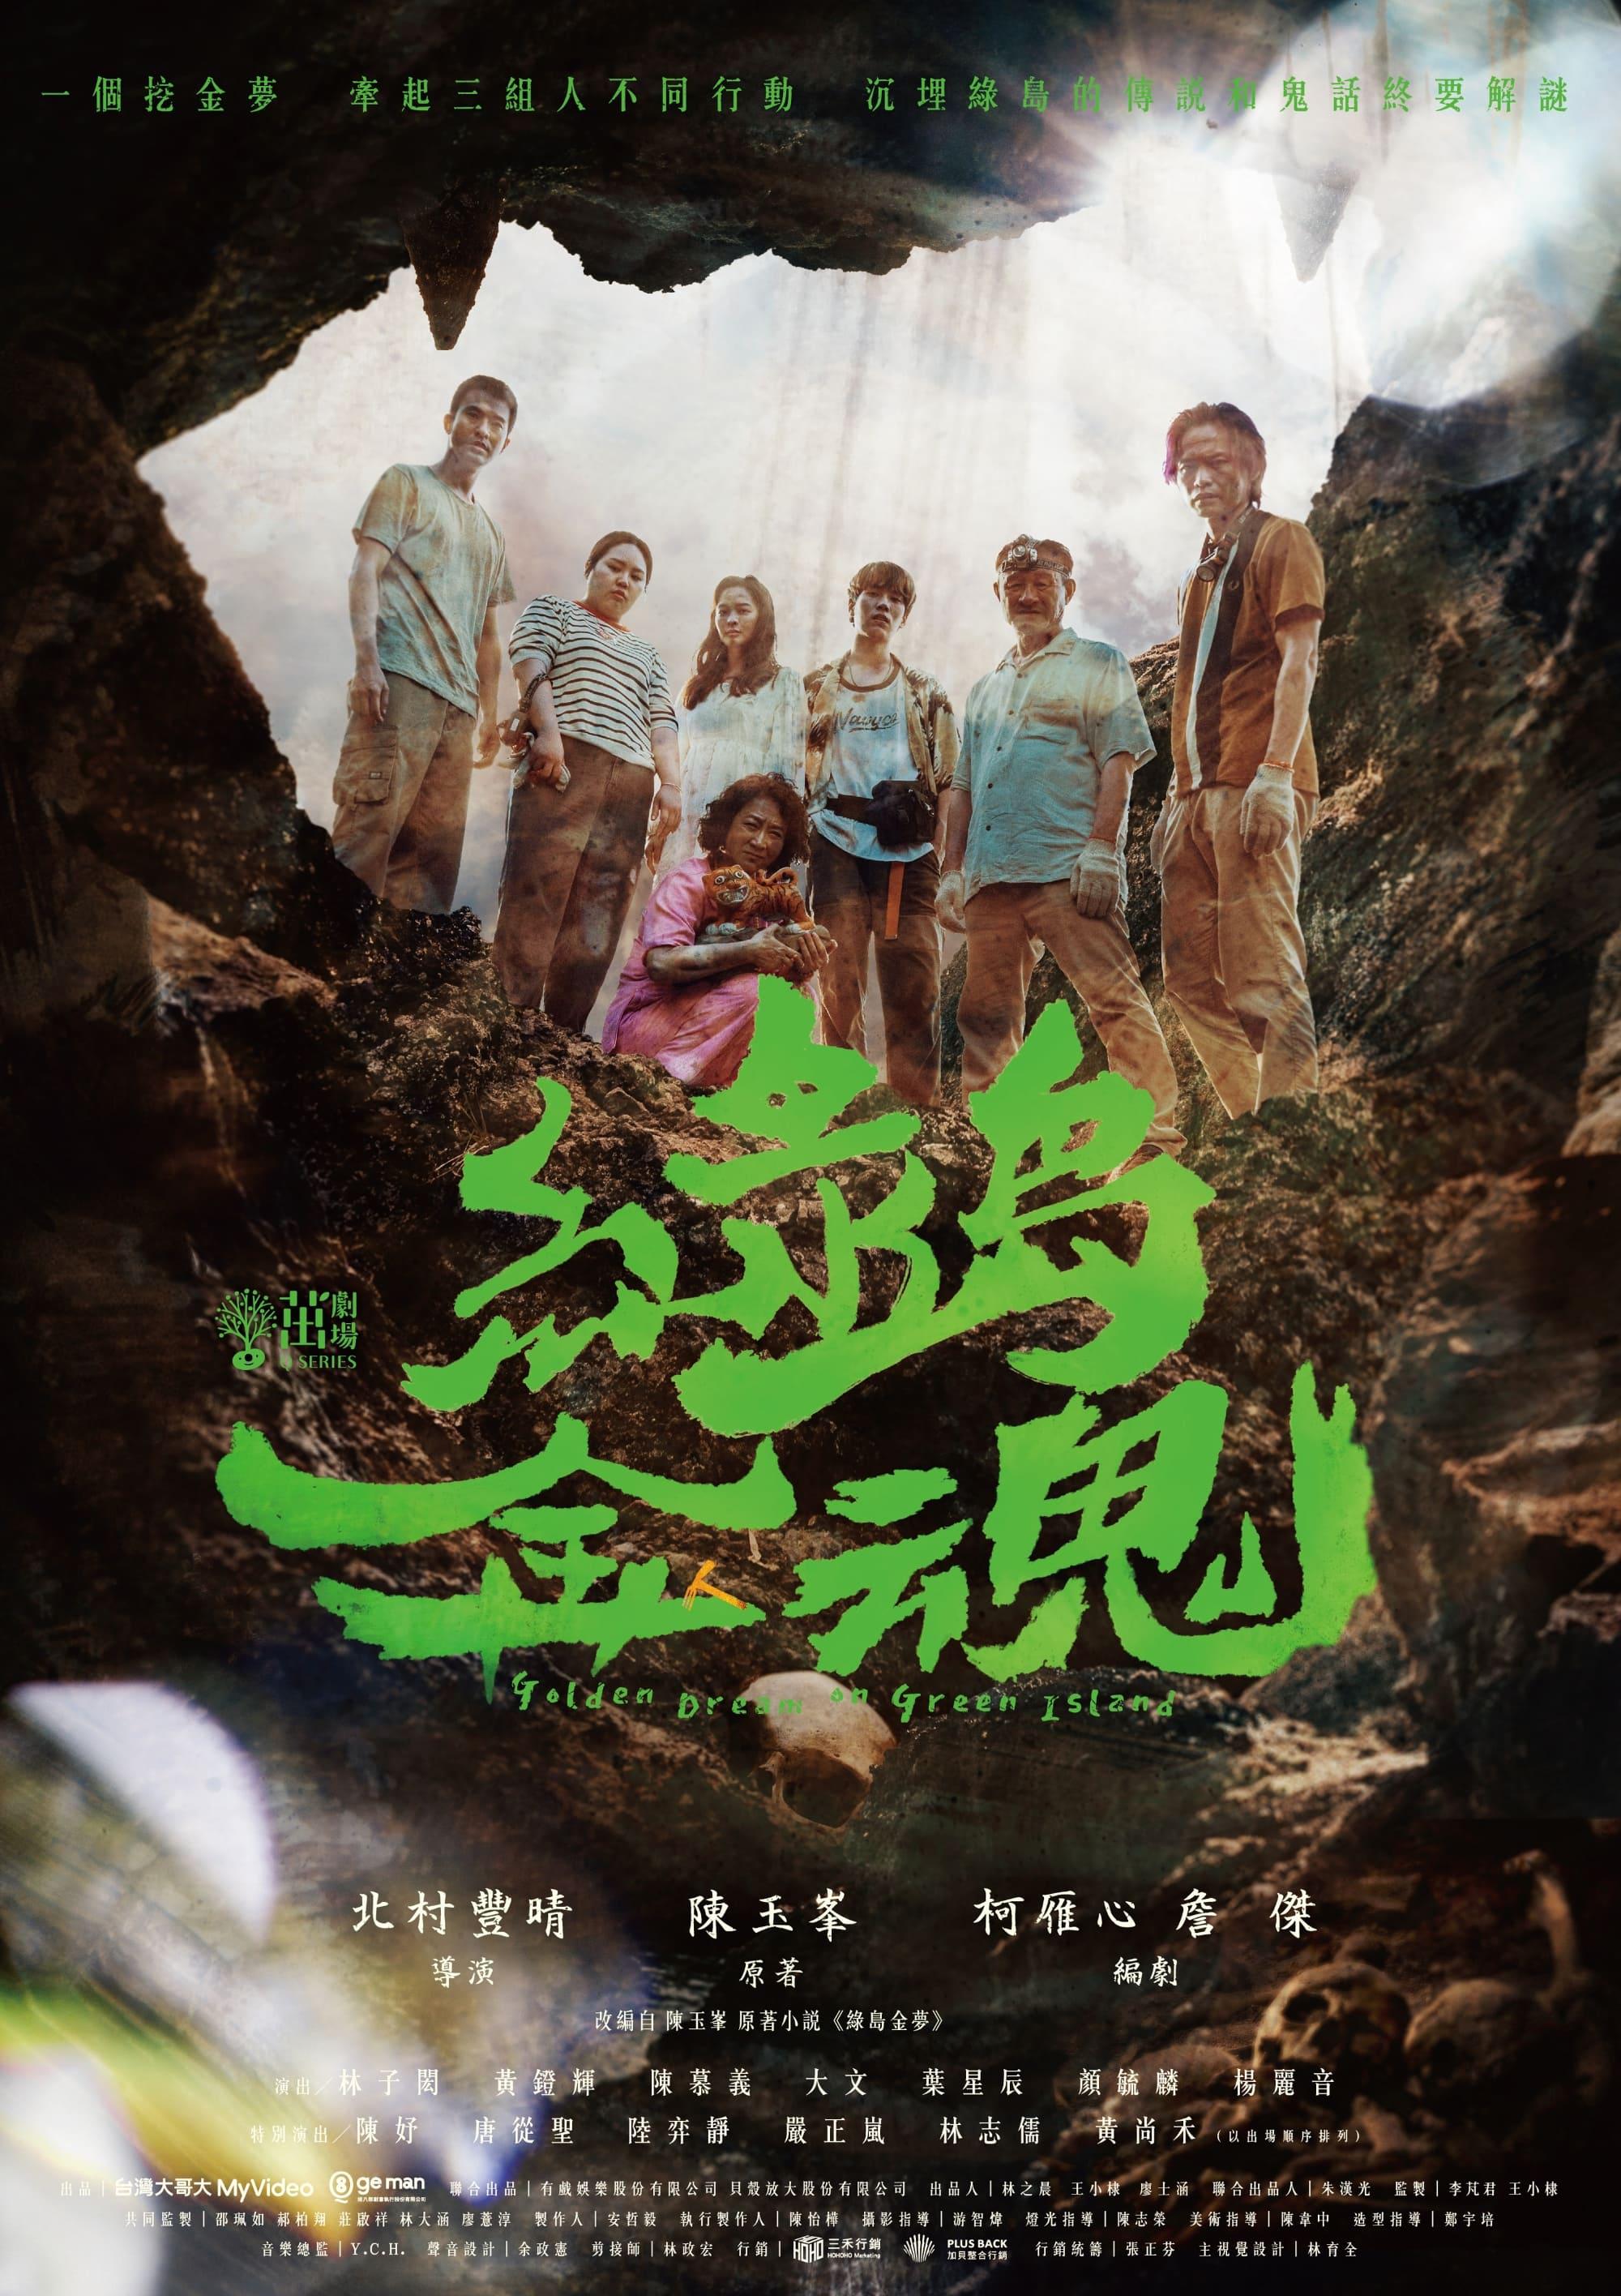 TV ratings for Golden Dream On Green Island (綠島金魂) in Malaysia. PTS TV series